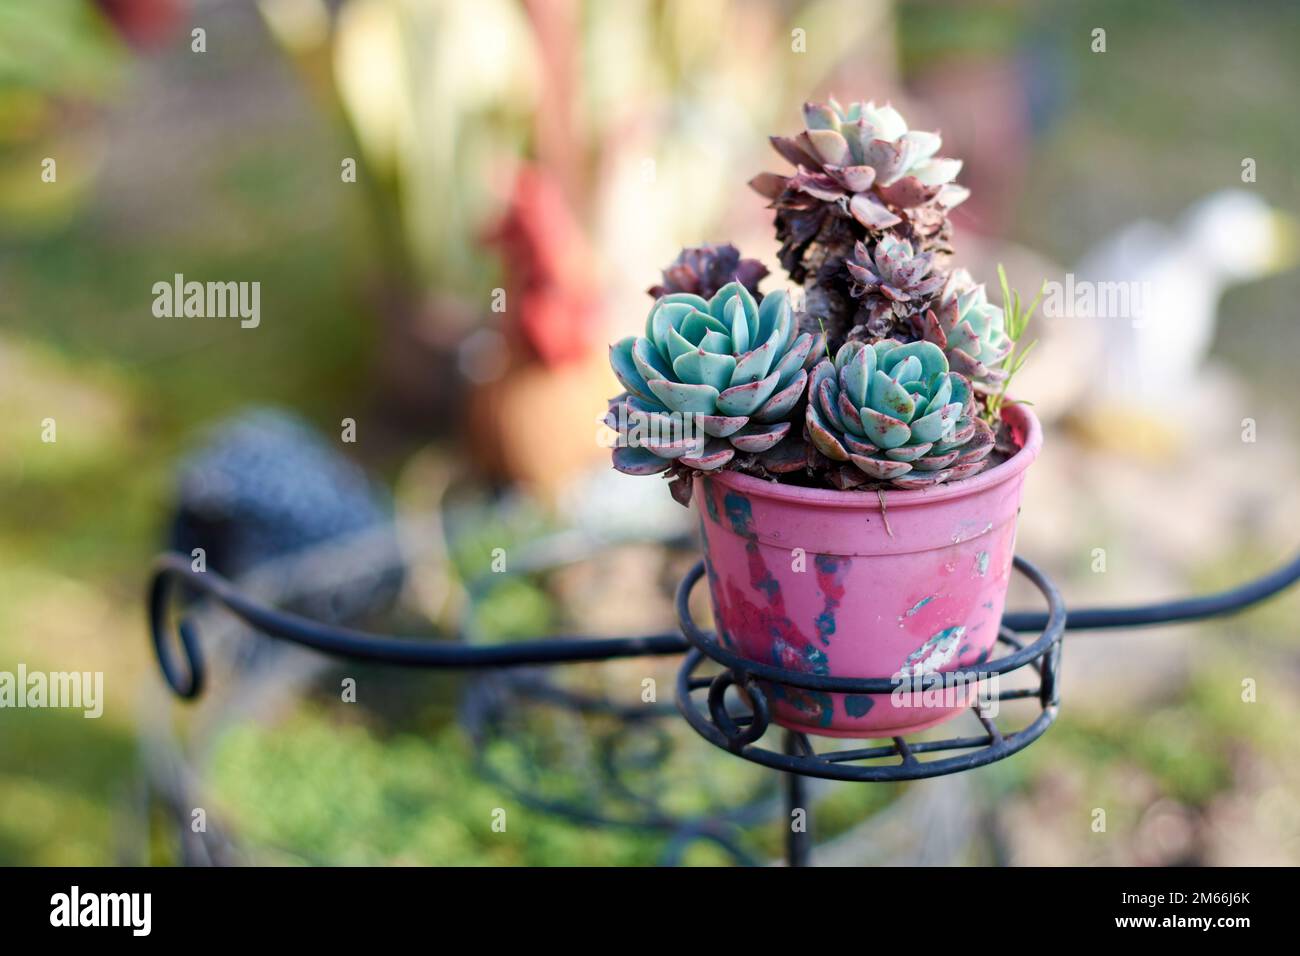 Horizontal close up of small potted Echeveria succulent plant with blurred background in the garden of a house. Stock Photo